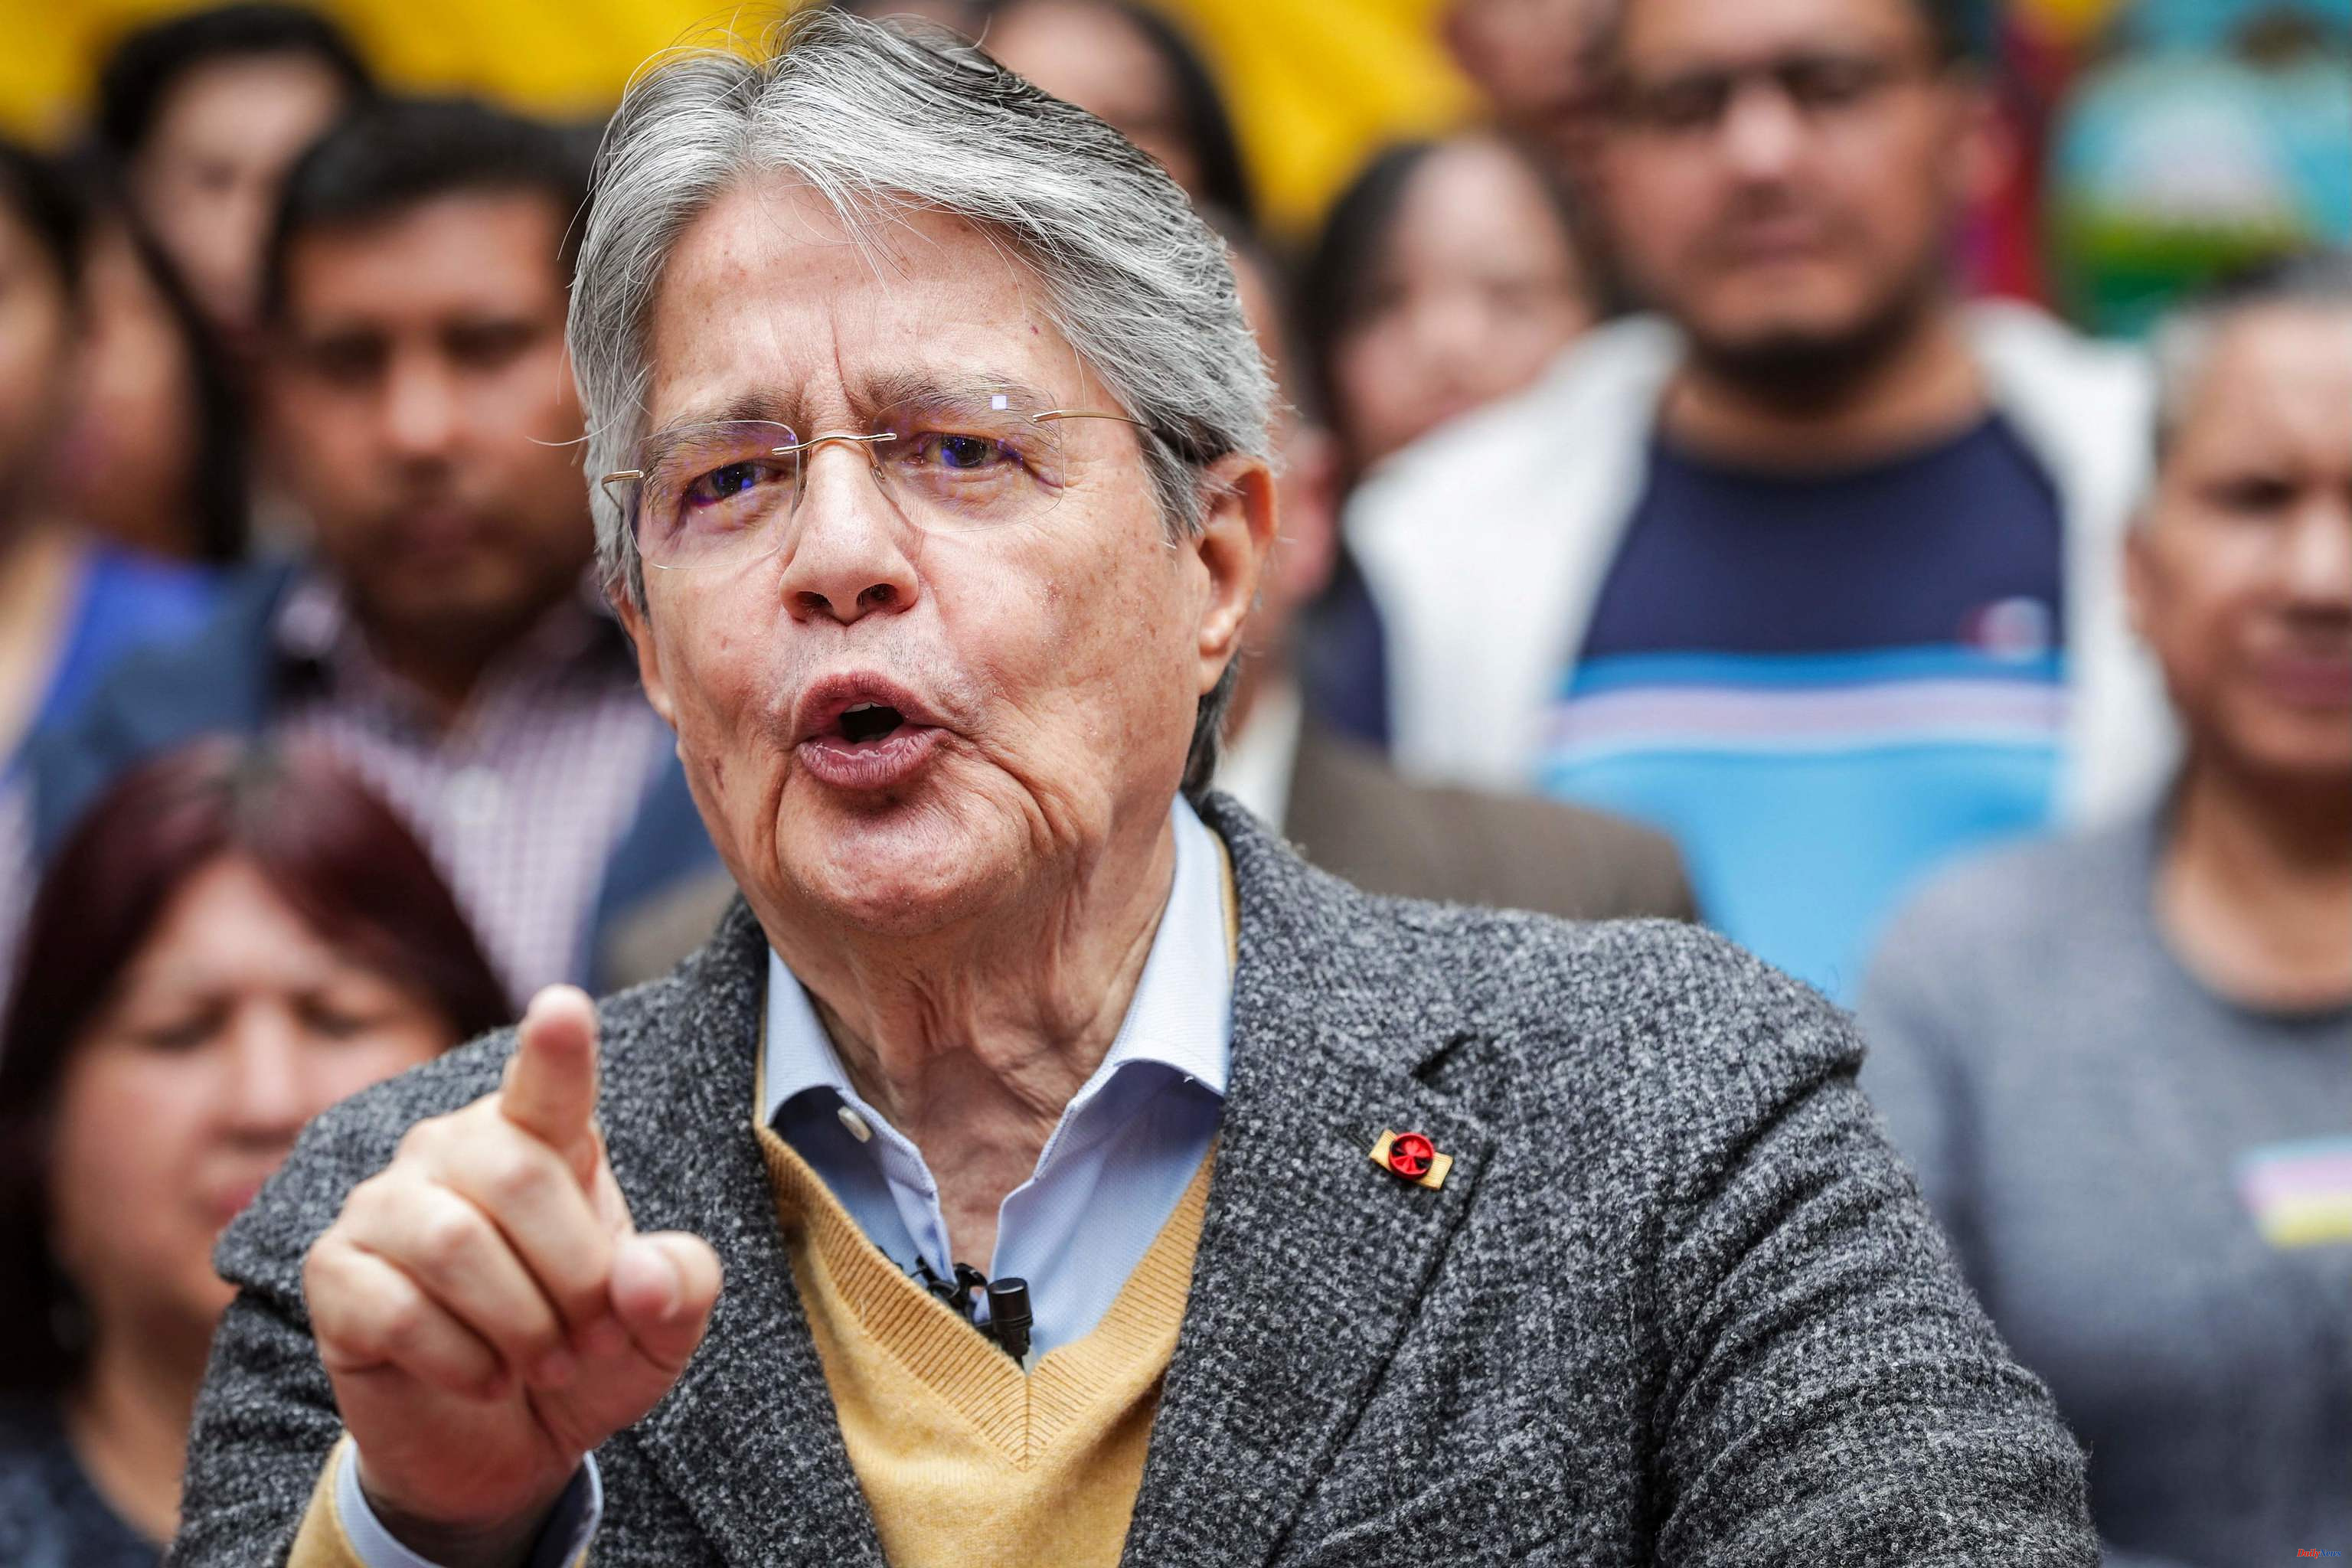 Ecuador The man in the case that led to the impeachment of Lasso is found dead in Ecuador